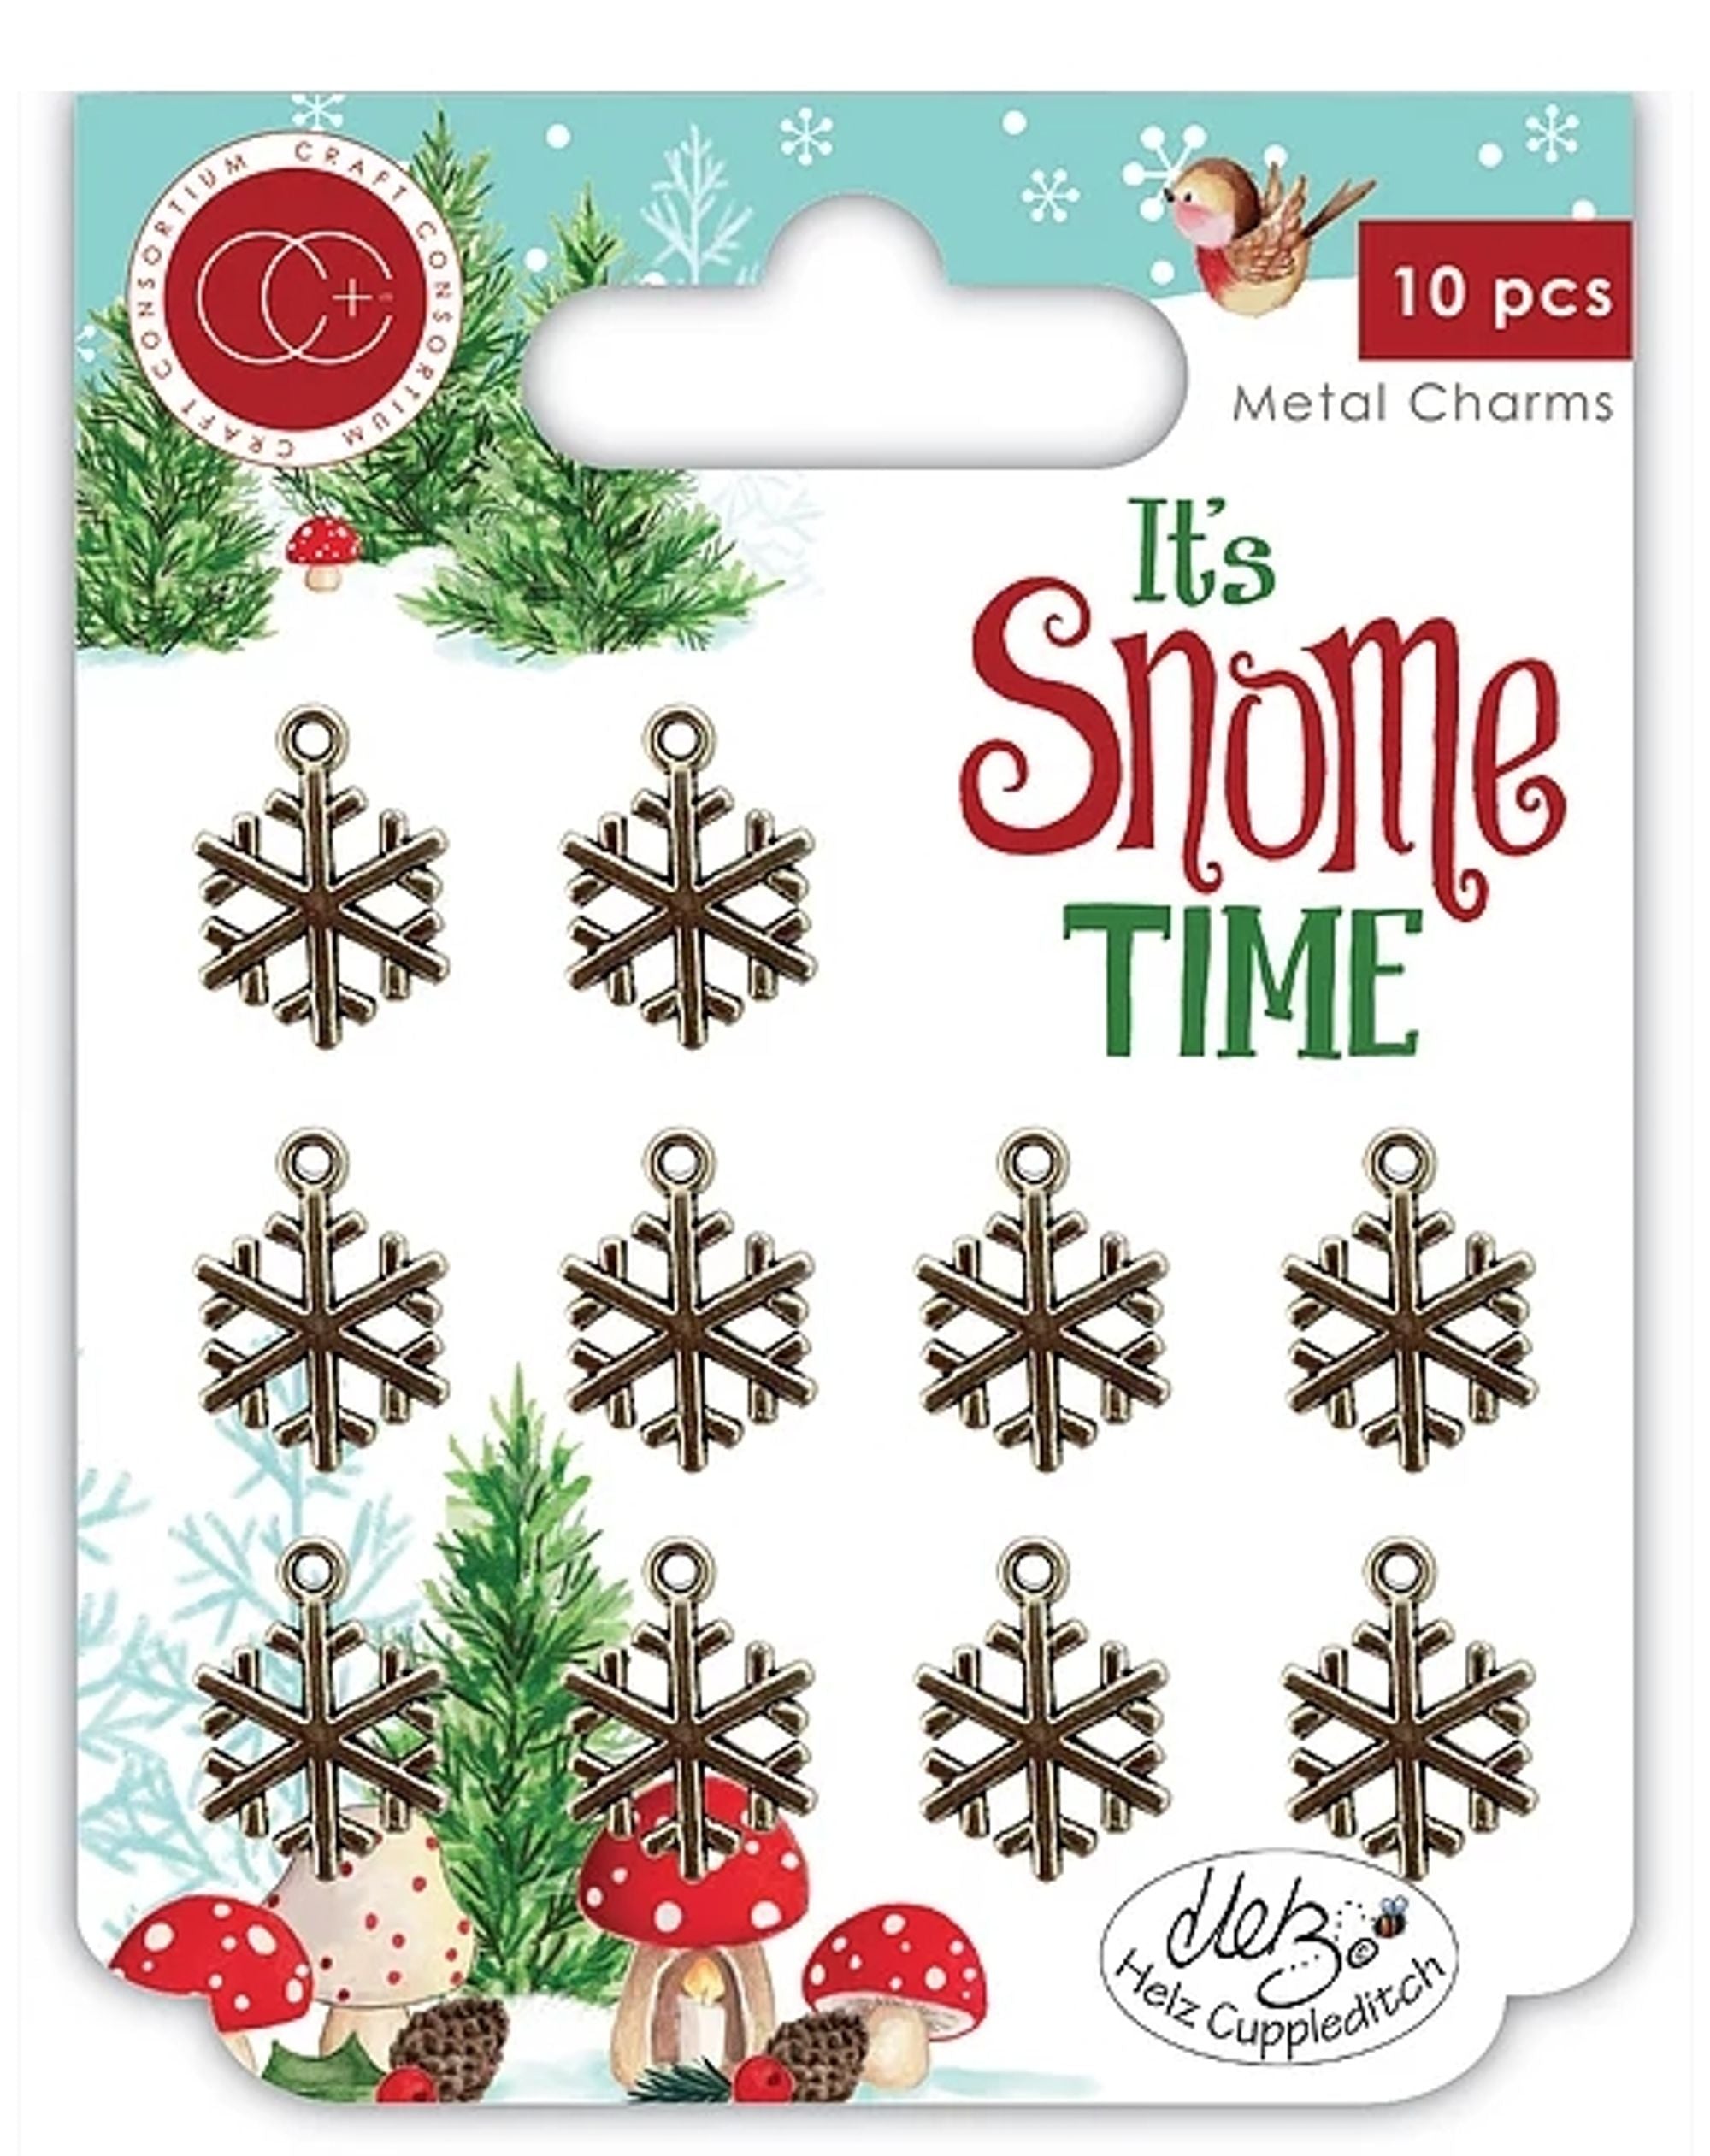 It's Snome Time - Metal Charms - Snowflakes